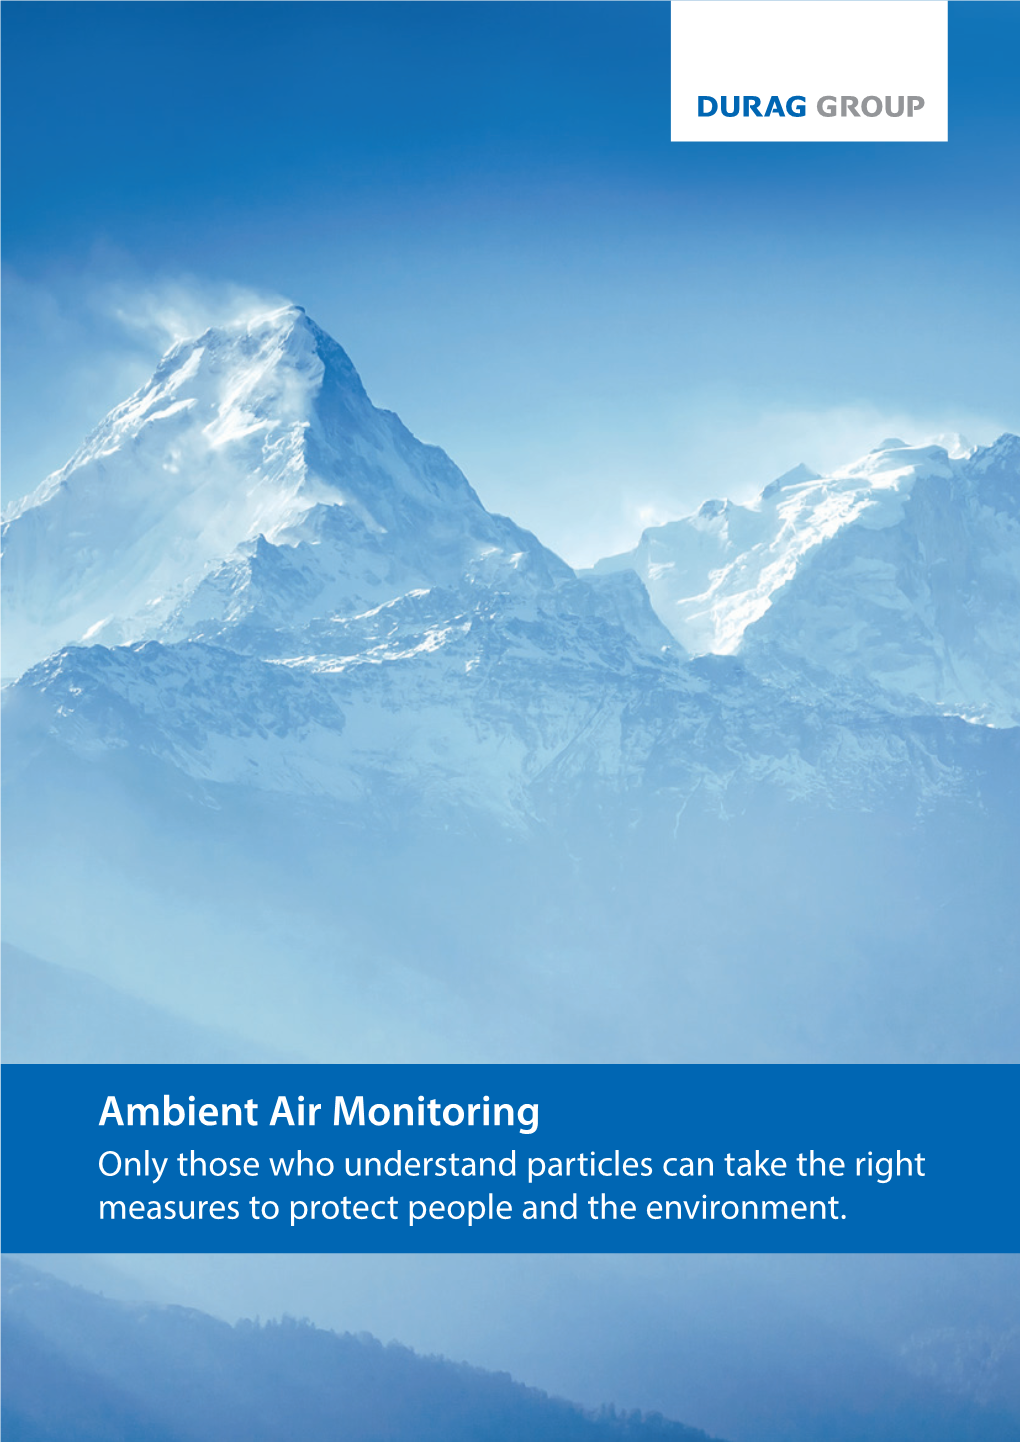 Ambient Air Monitoring Only Those Who Understand Particles Can Take the Right Measures to Protect People and the Environment